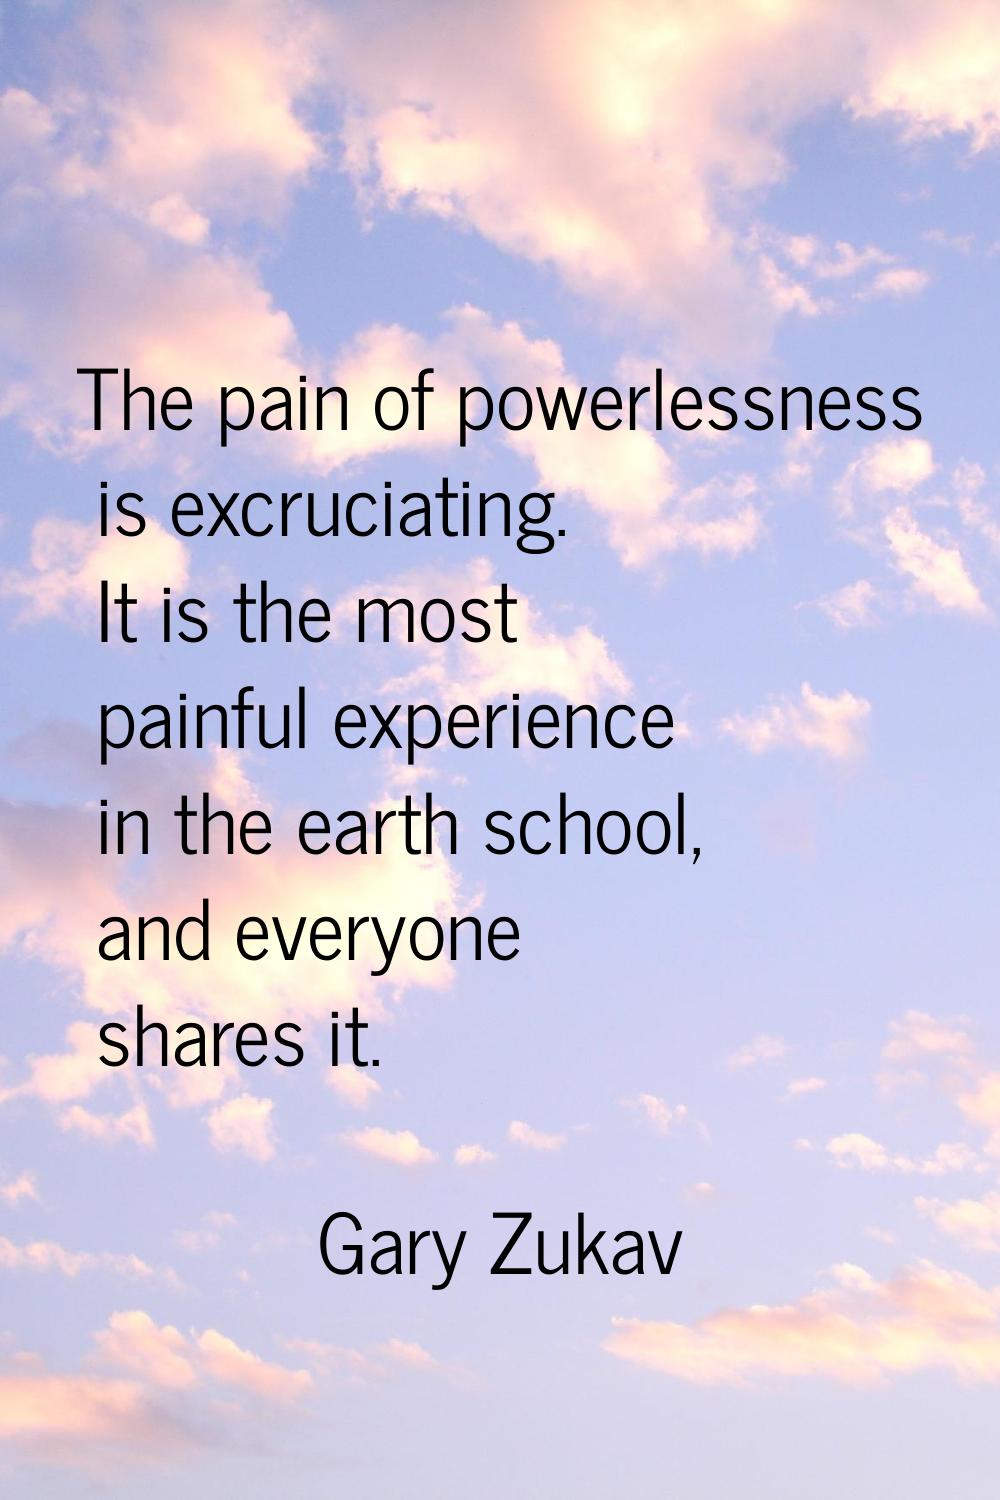 The pain of powerlessness is excruciating. It is the most painful experience in the earth school, a